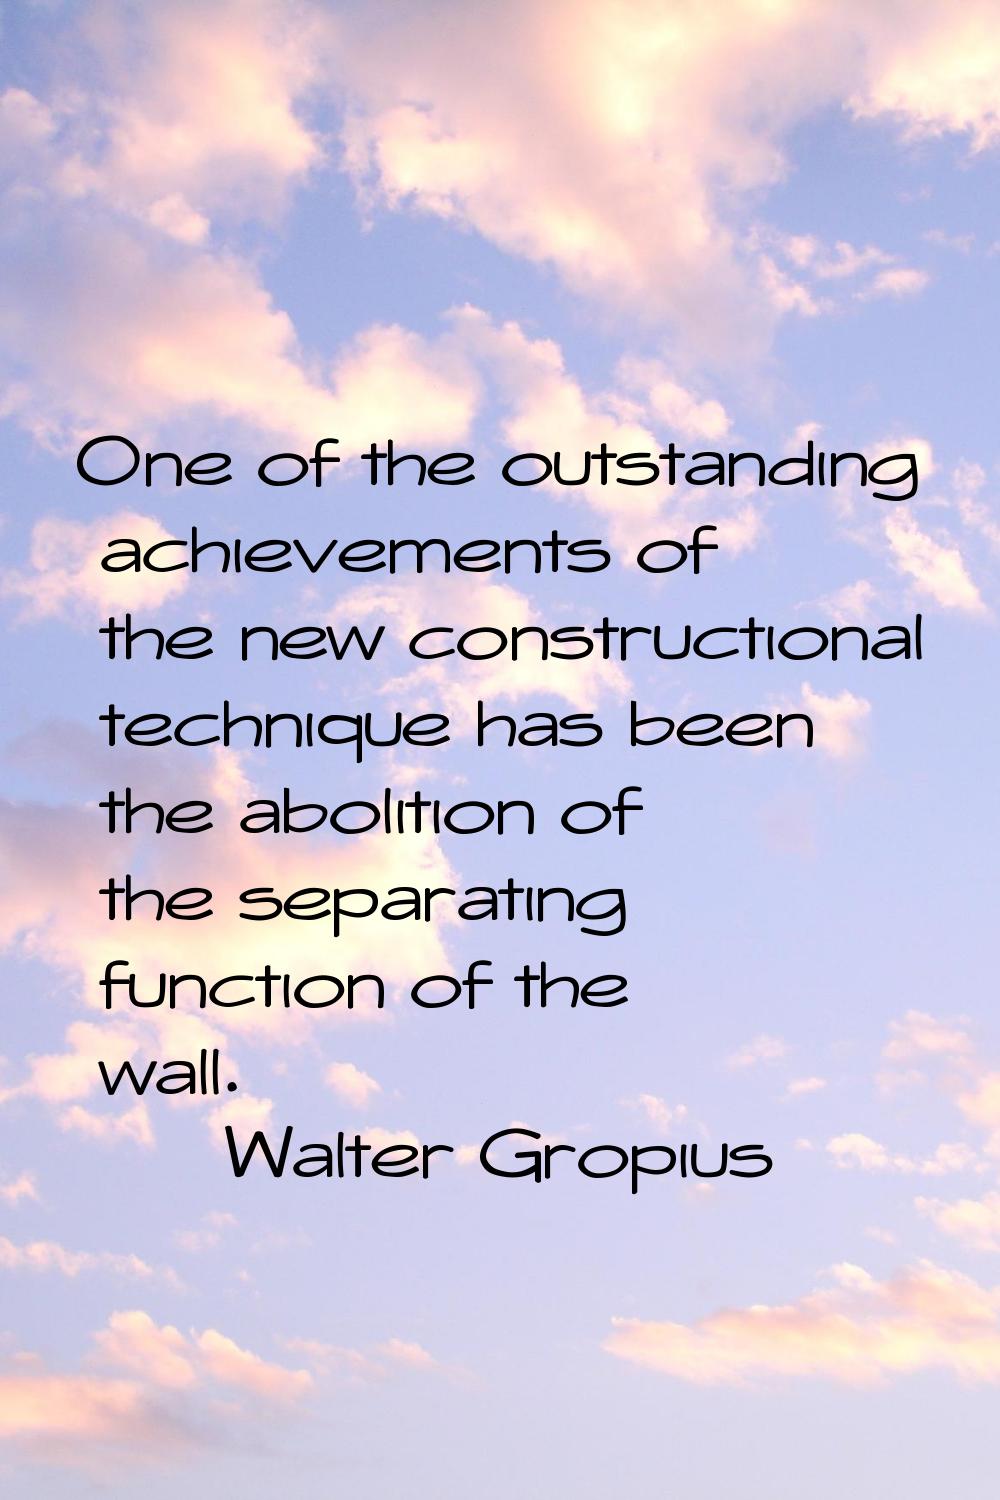 One of the outstanding achievements of the new constructional technique has been the abolition of t